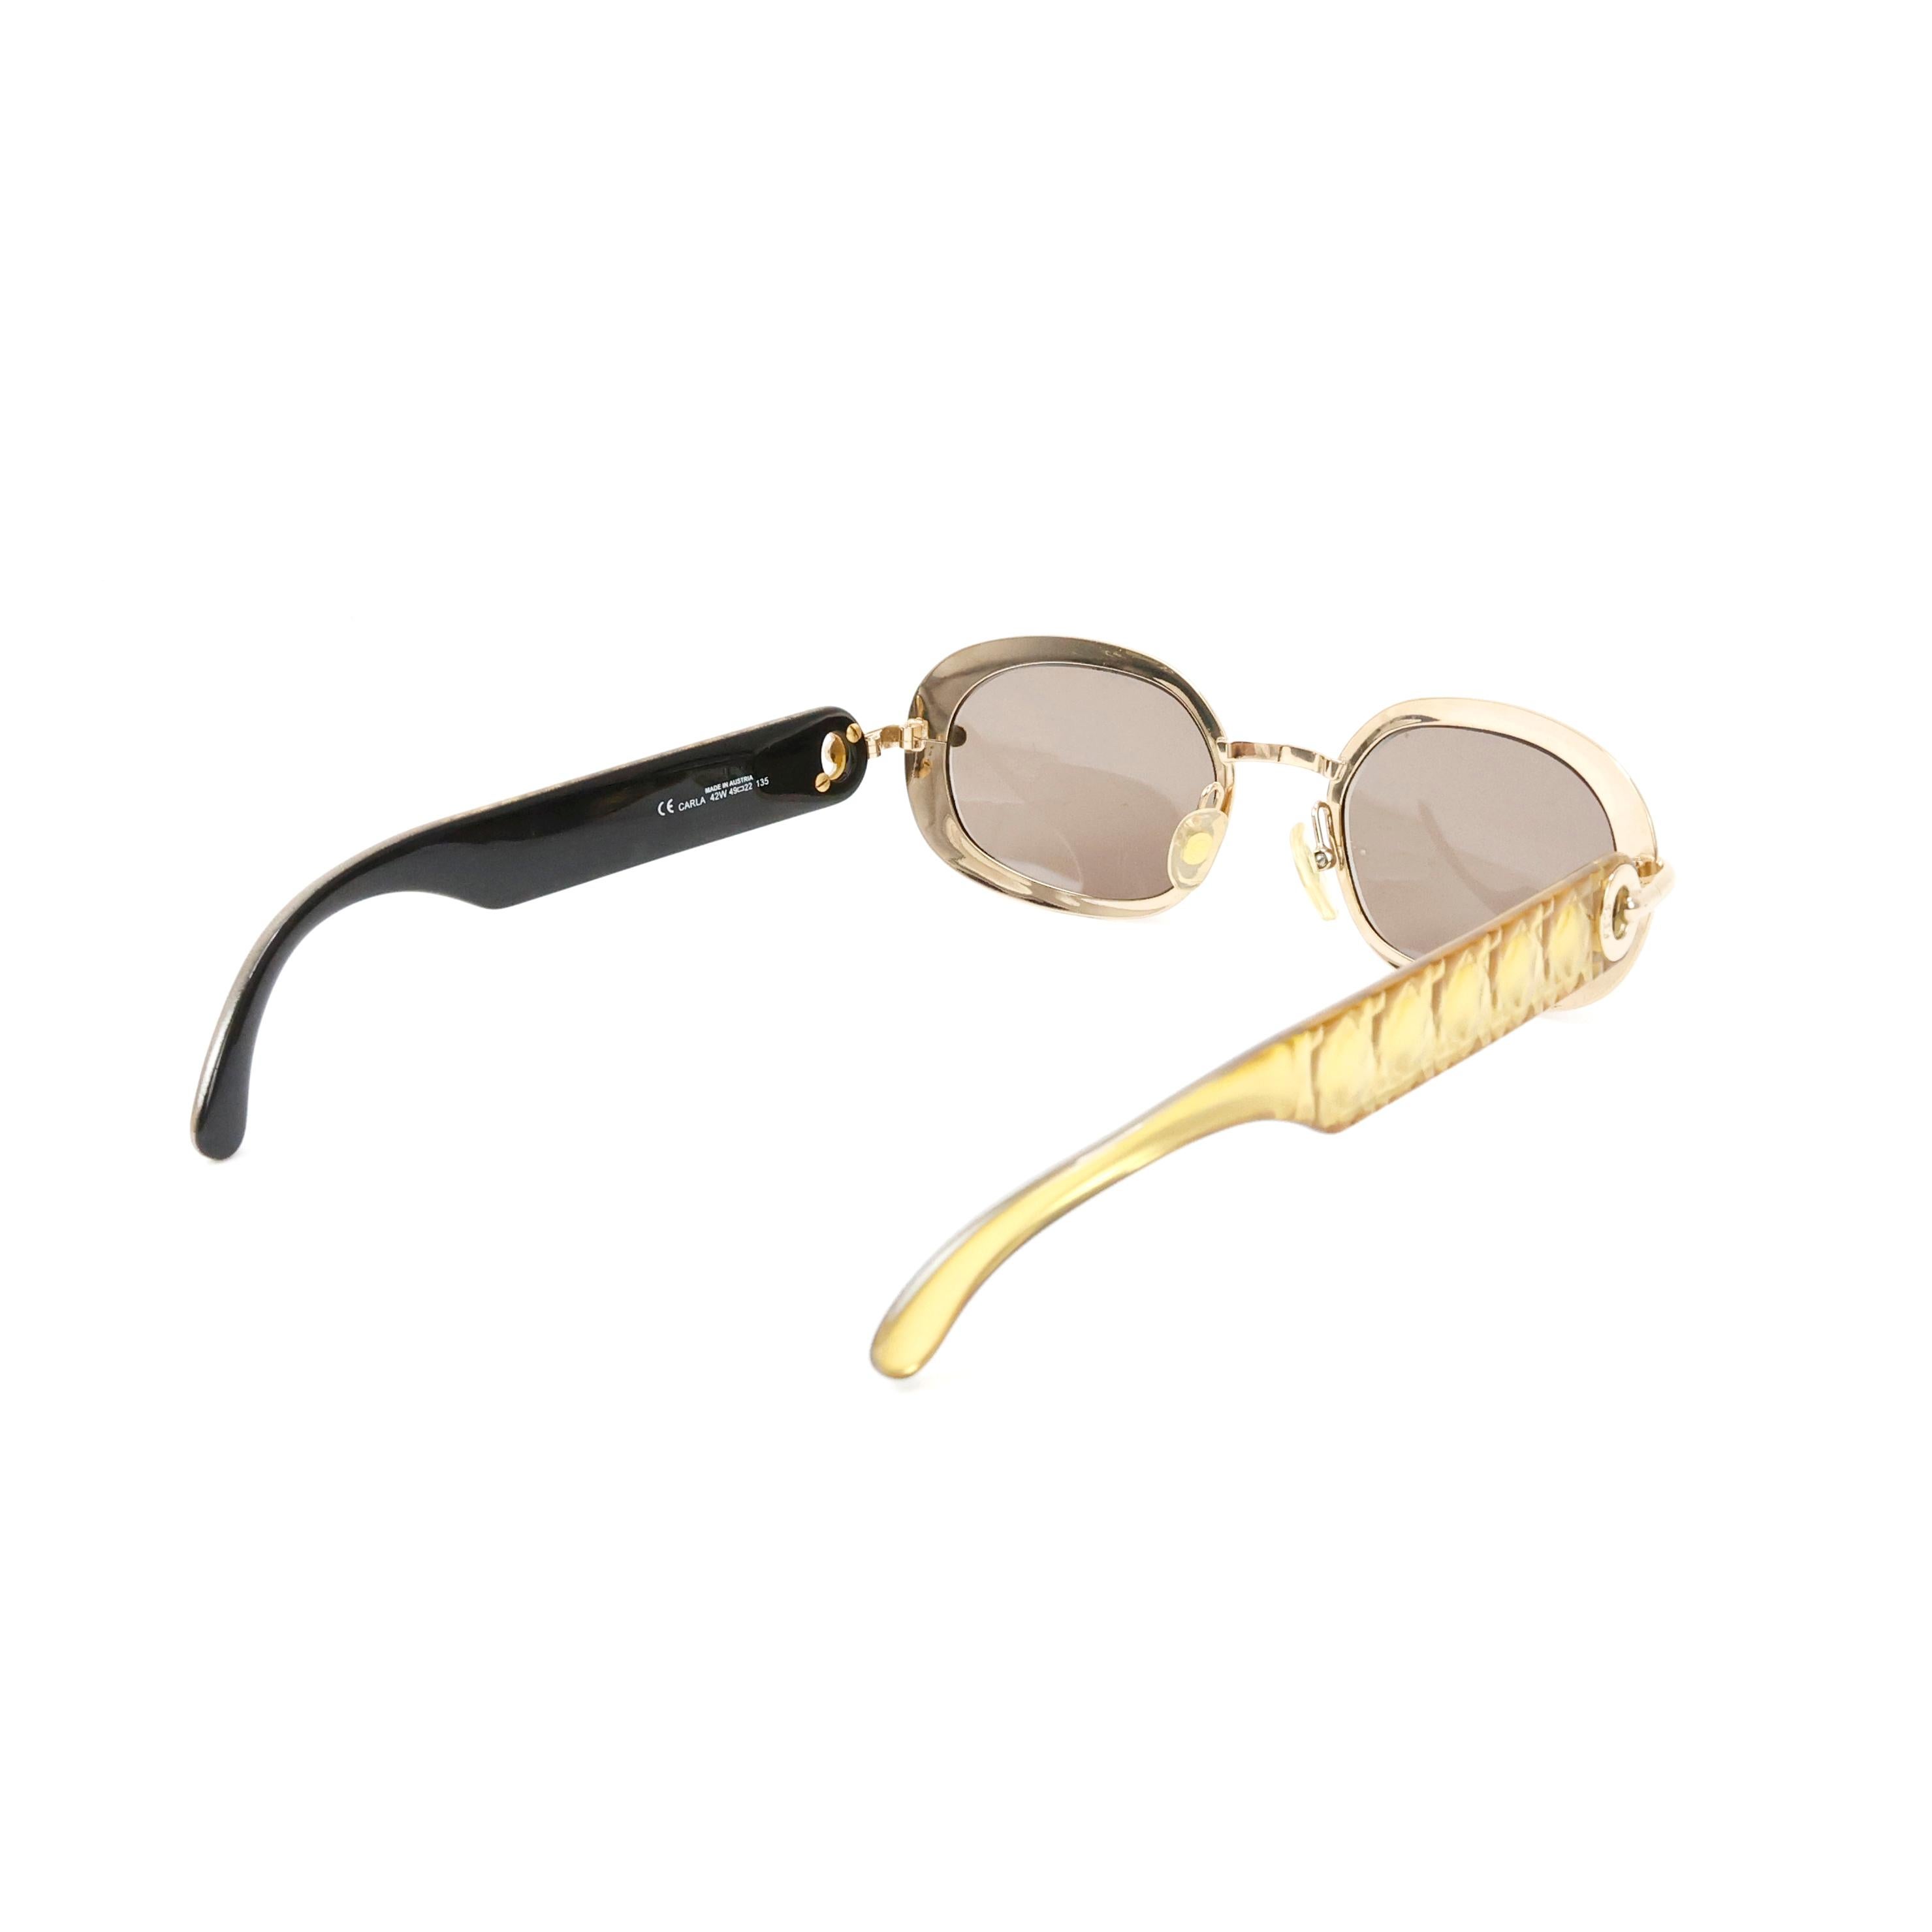 Christian Dior round metallic sunglasses color gold. 


Condition:
Really good.